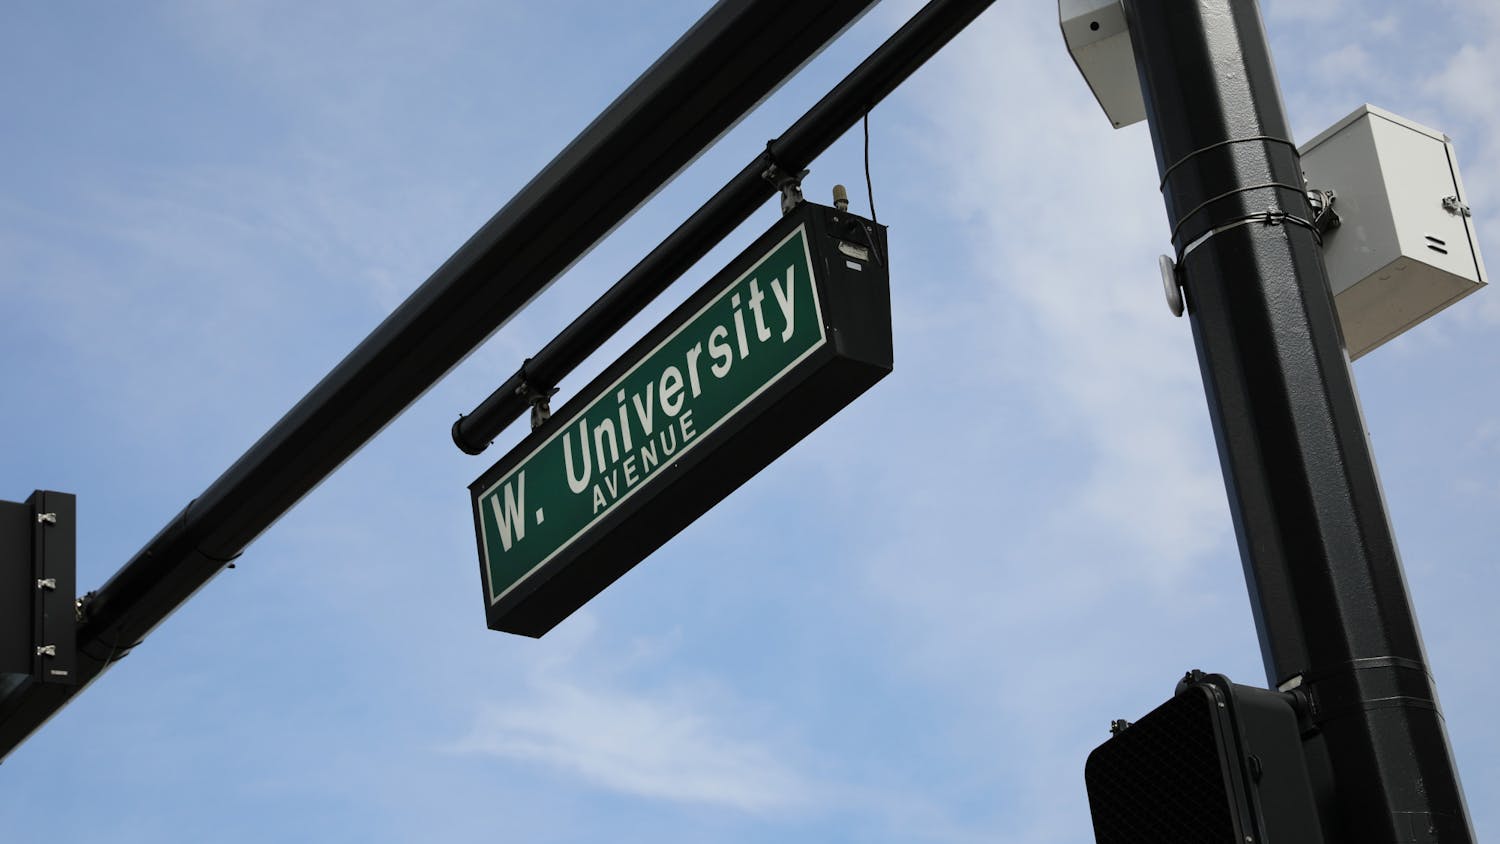 The street sign for West University Avenue along the UF campus on Sunday, June 6, 2021. The Newell Gateway, one of two gateways to be constructed, will be implemented at the intersection of Newell Drive and West University Avenue as part of an effort to create an auto-free zone at the core of campus.